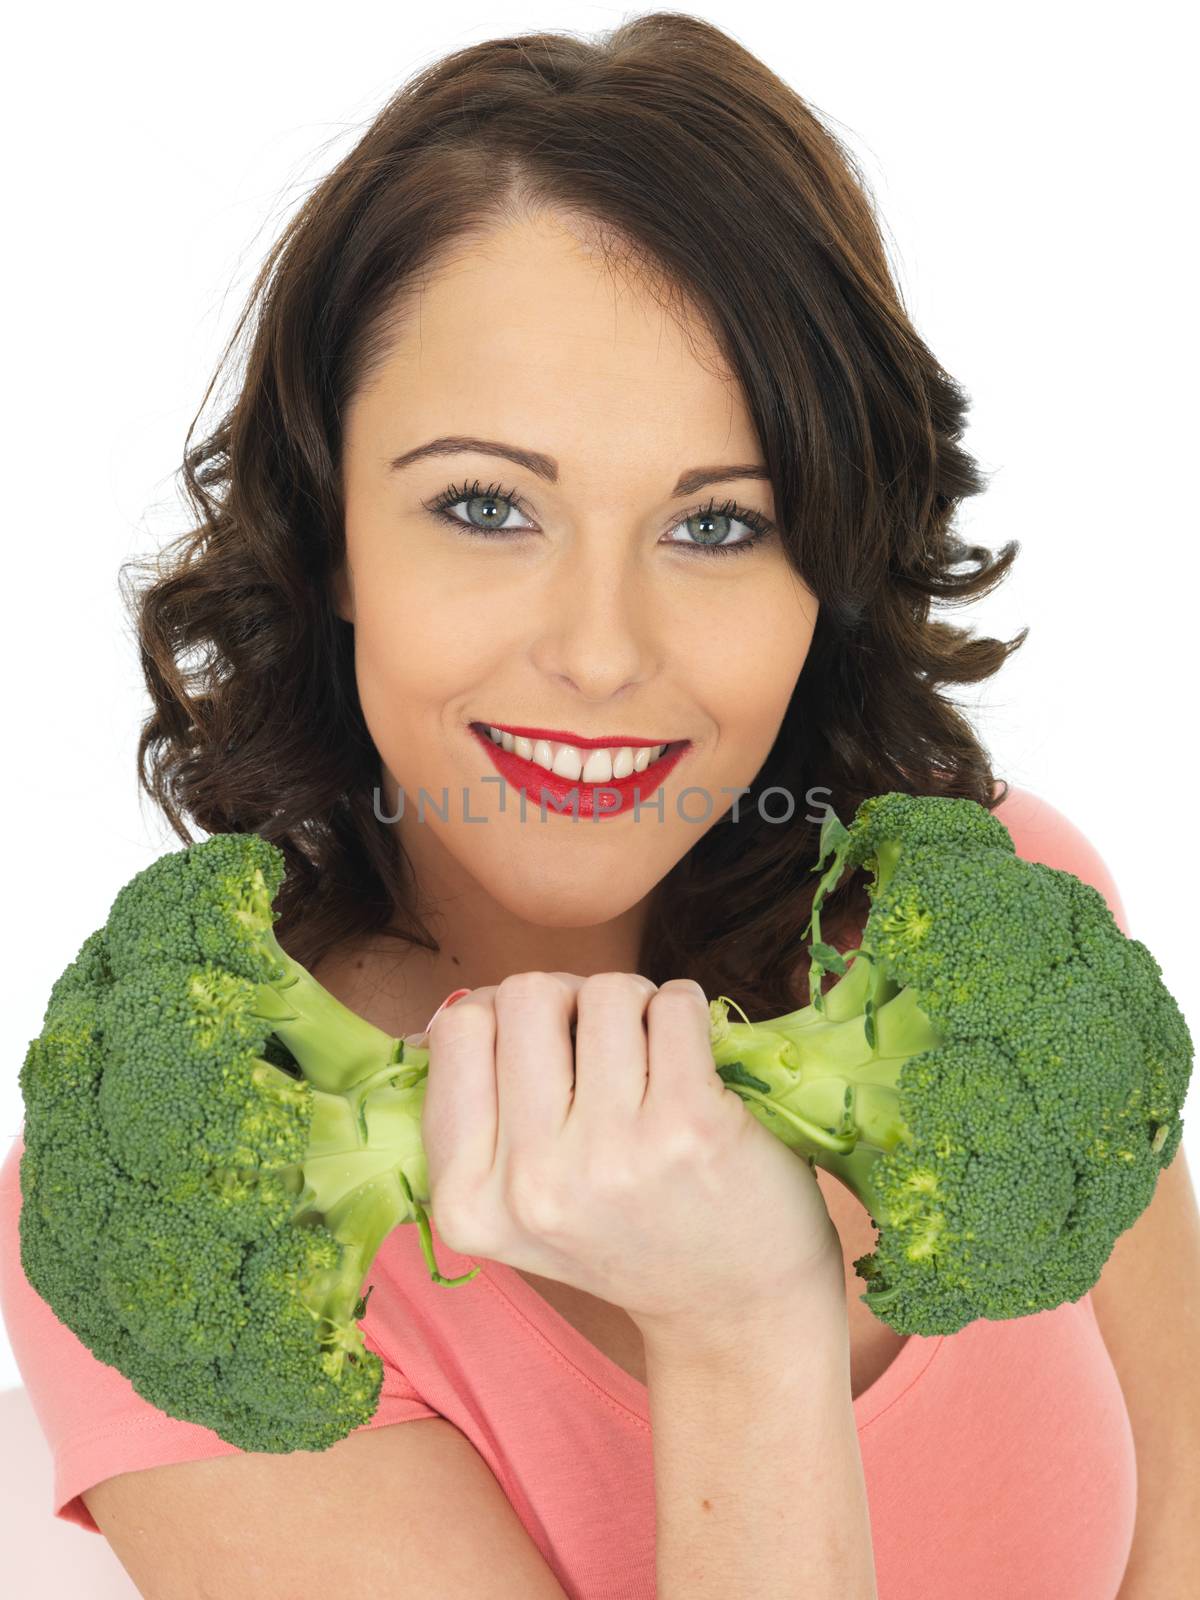 Young Woman Holding Raw Broccoli by Whiteboxmedia